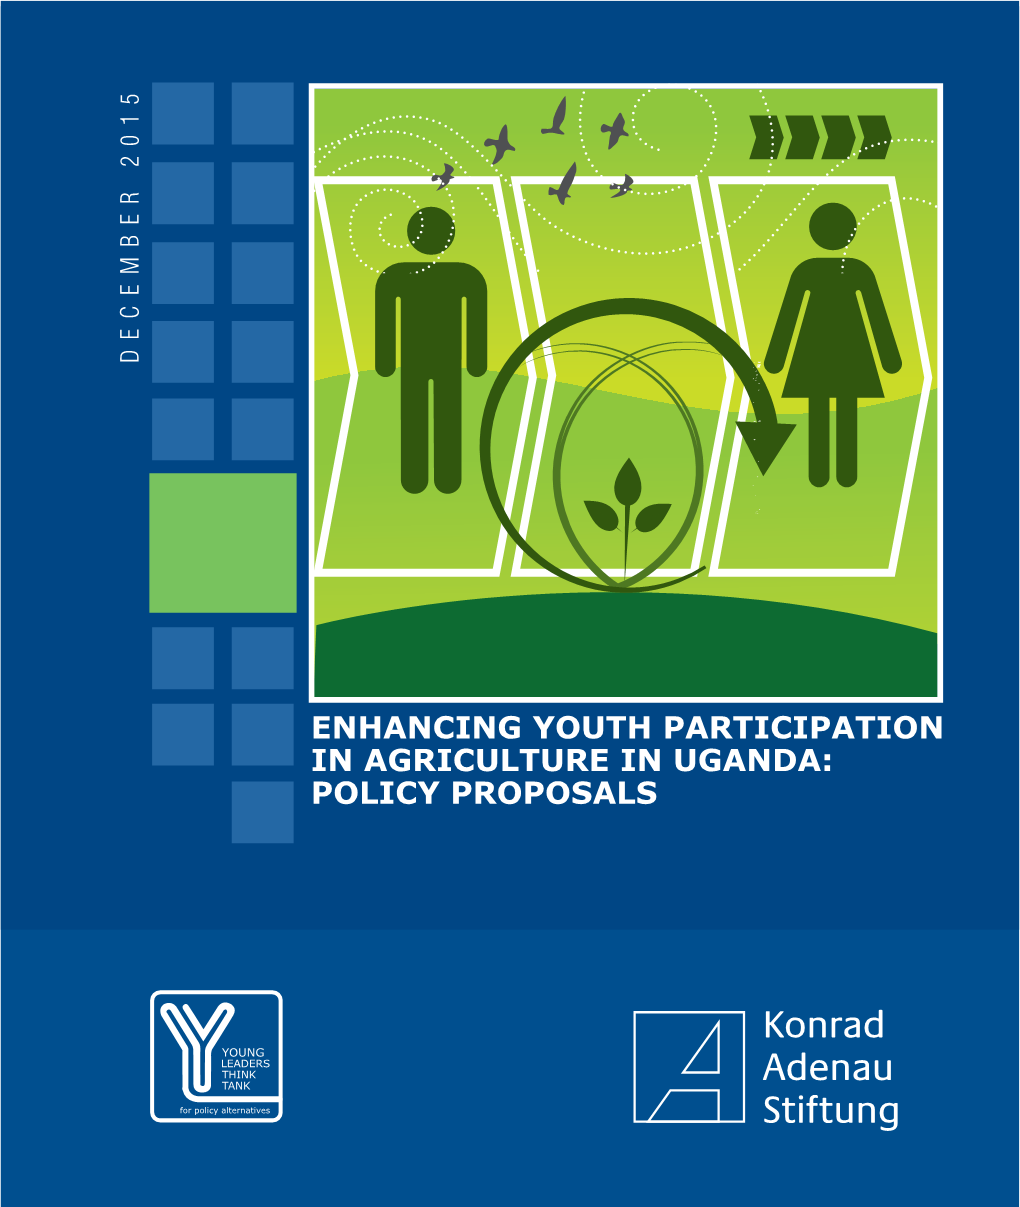 Enhancing Youth Participation in Agriculture in Uganda Policy